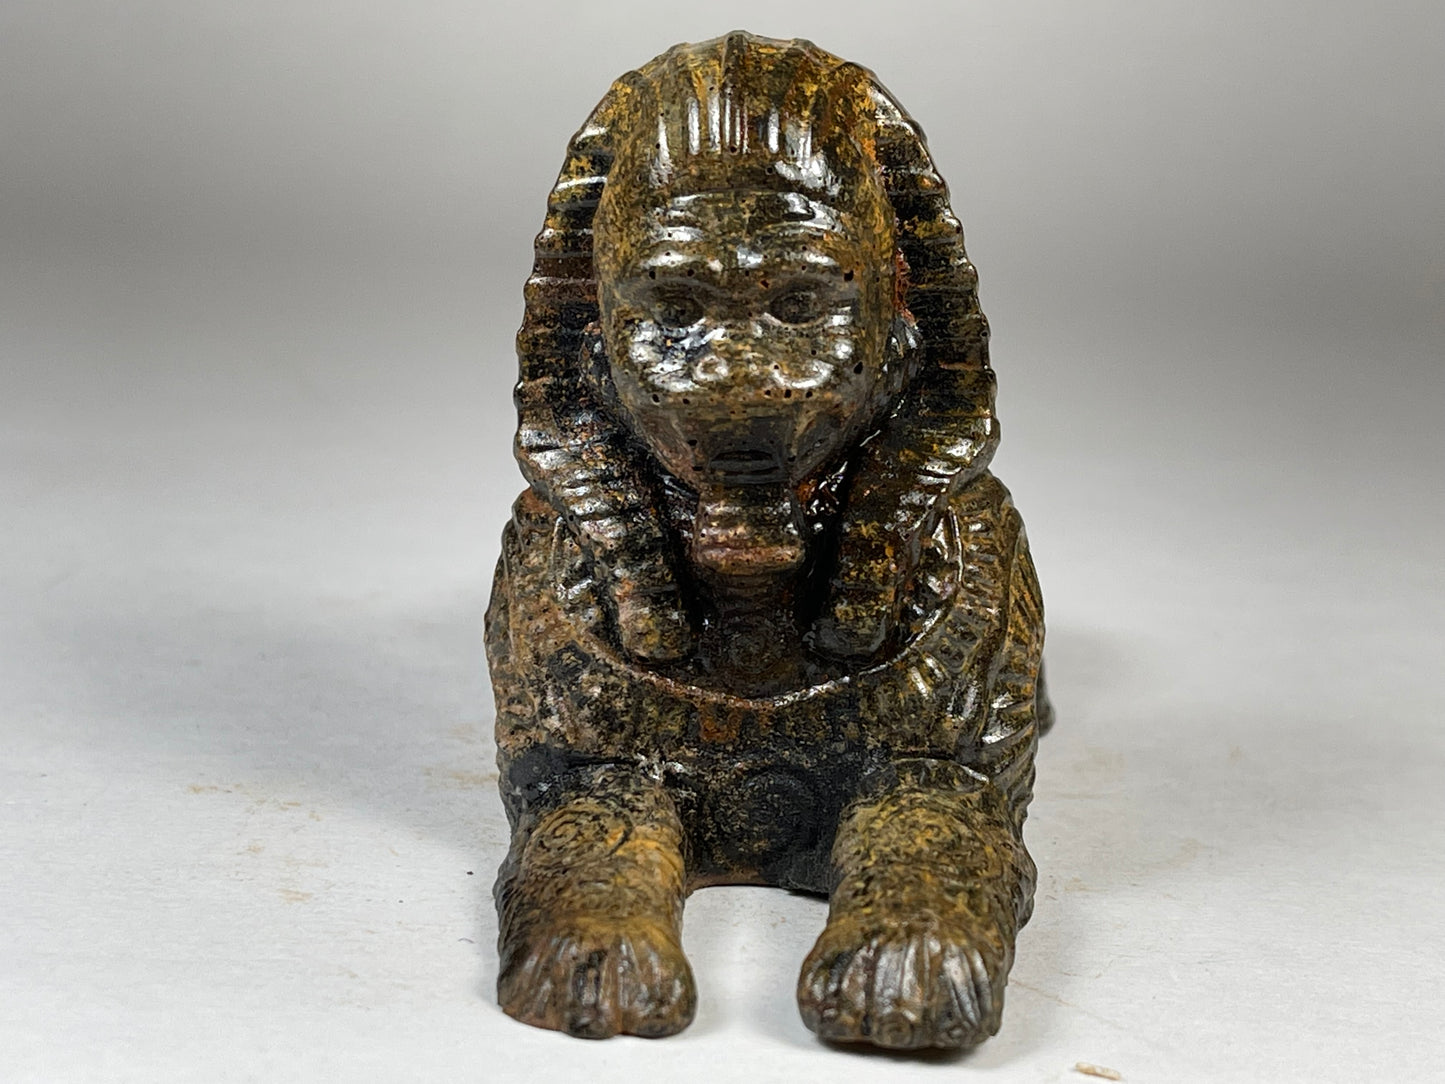 Sphinx Ape: Rusted in Egypt